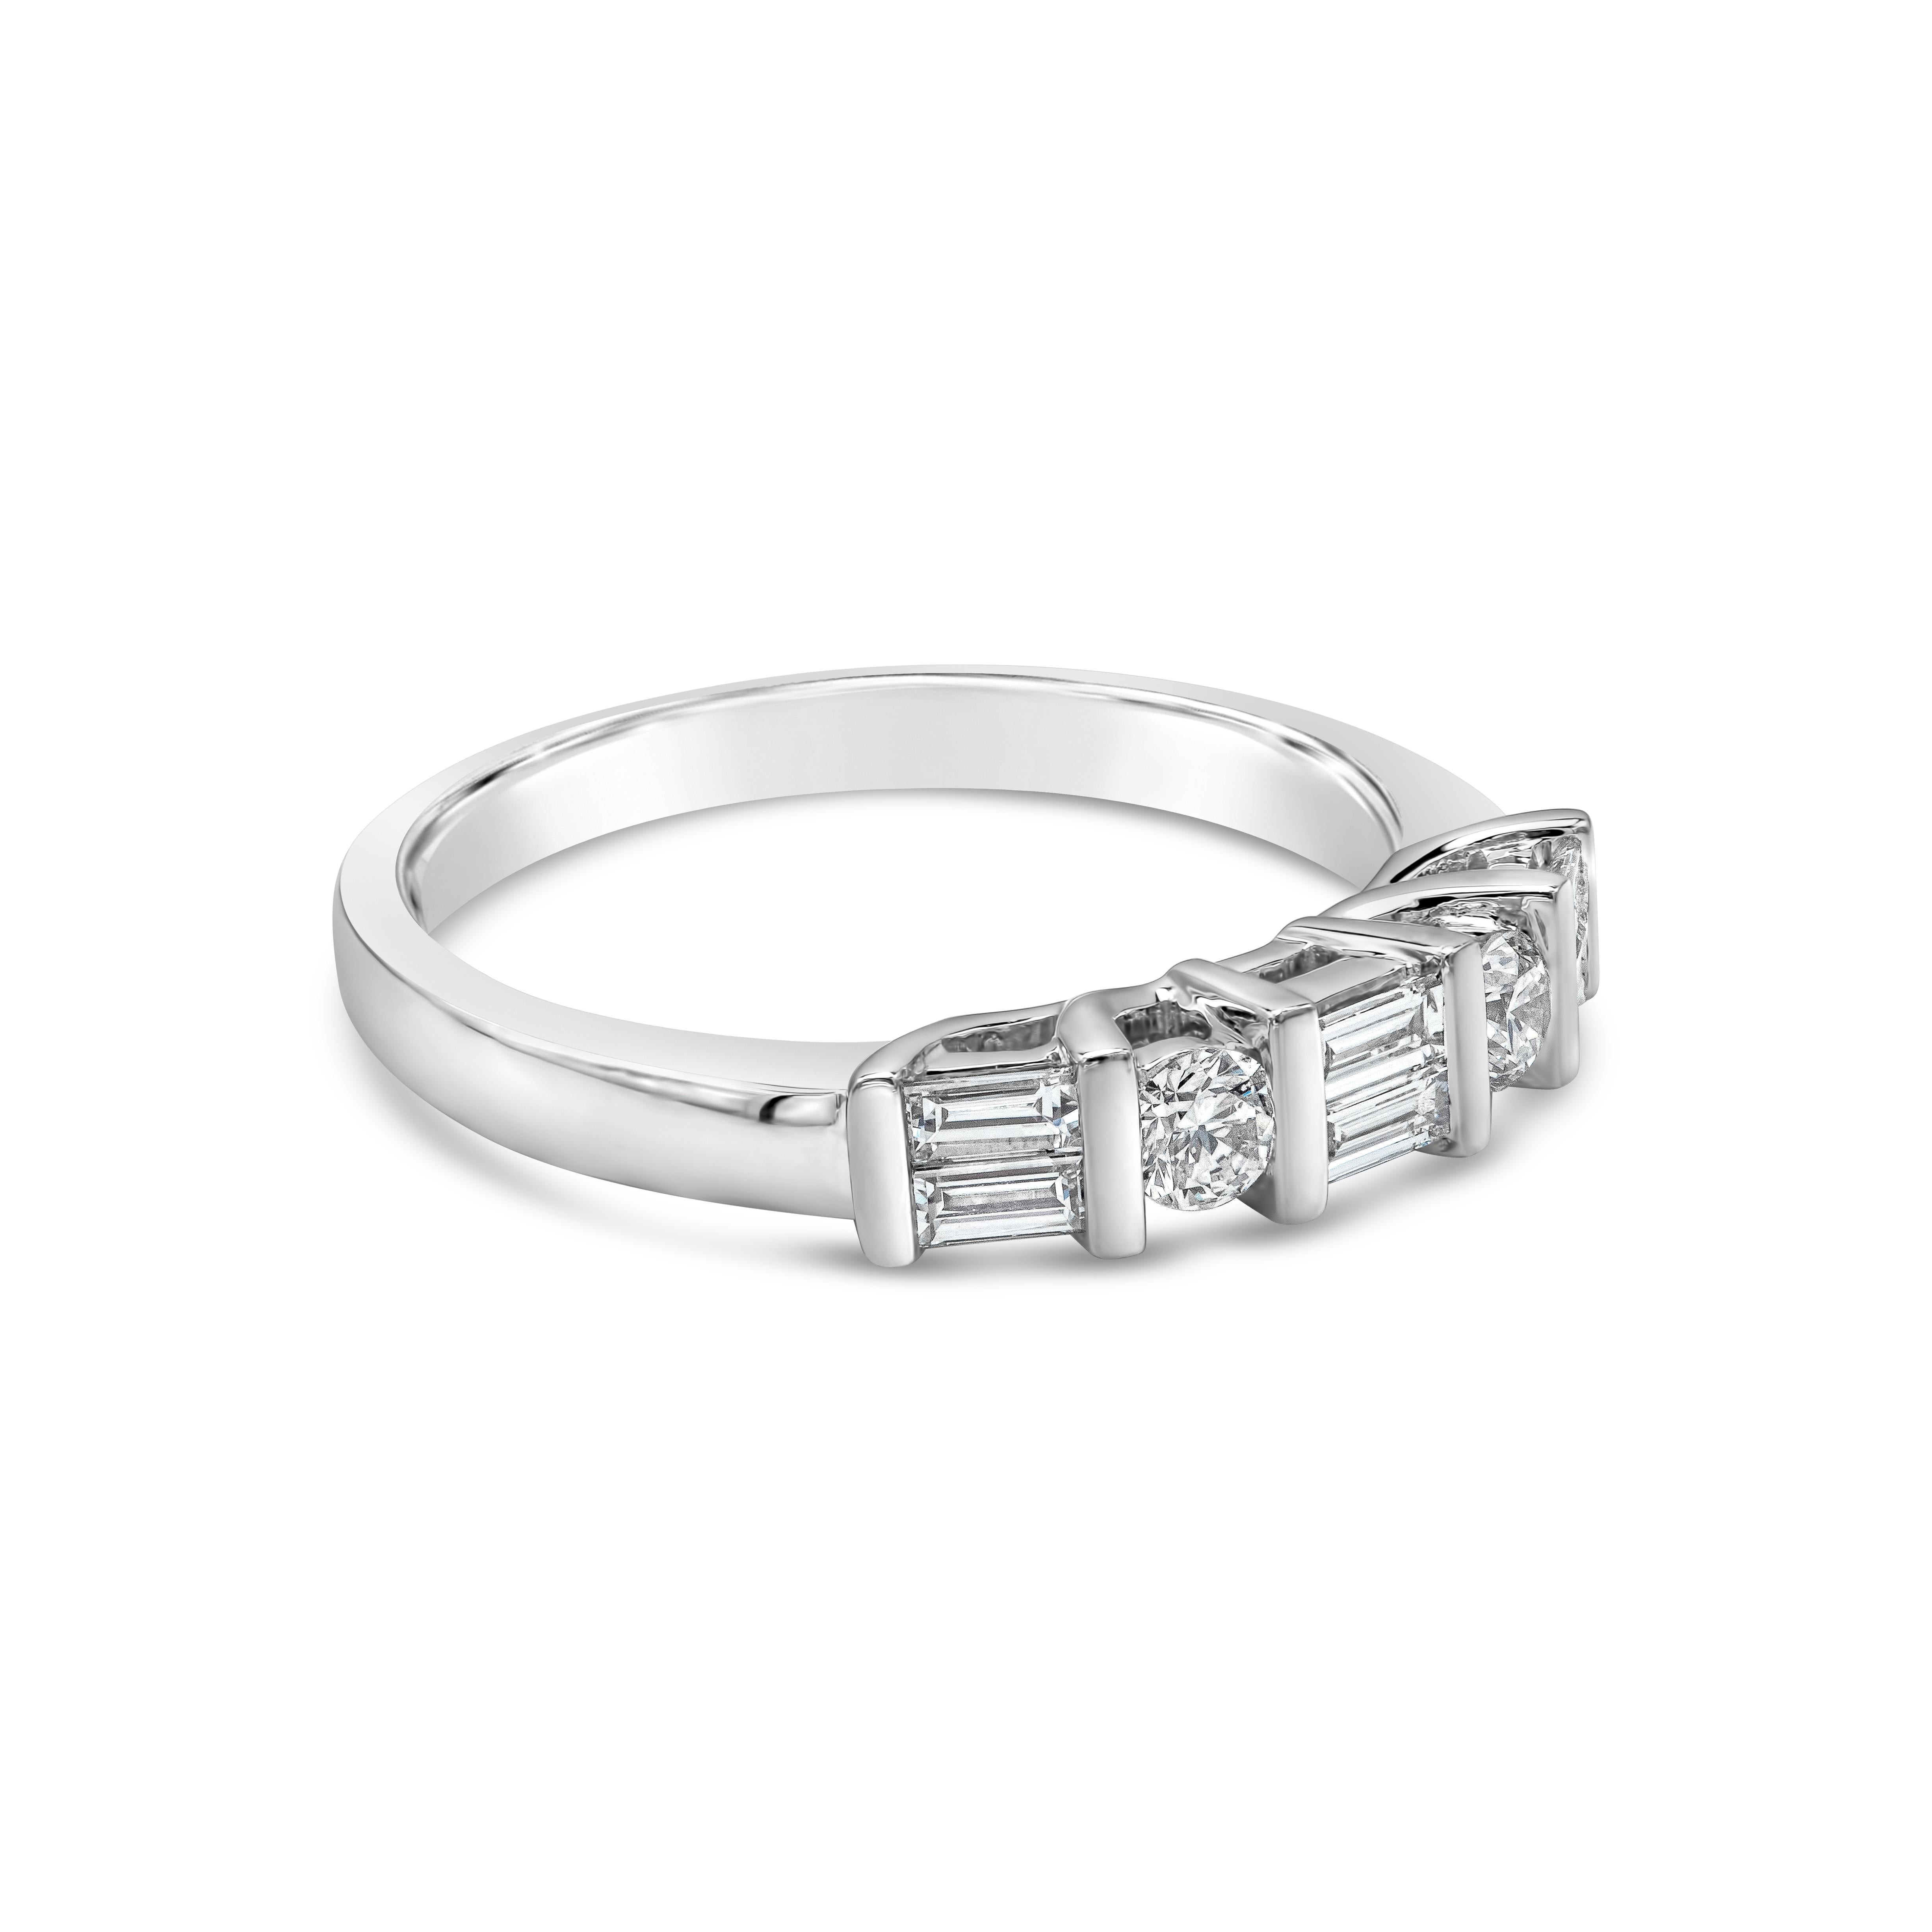 Features a five stone wedding band ring with baguette diamonds weighing 0.33 carats total, alternating elegantly with round diamonds weighing 0.19 carats total. Set on 18K white gold with bars in between. Size 6.5 US, resizable upon request.

Roman